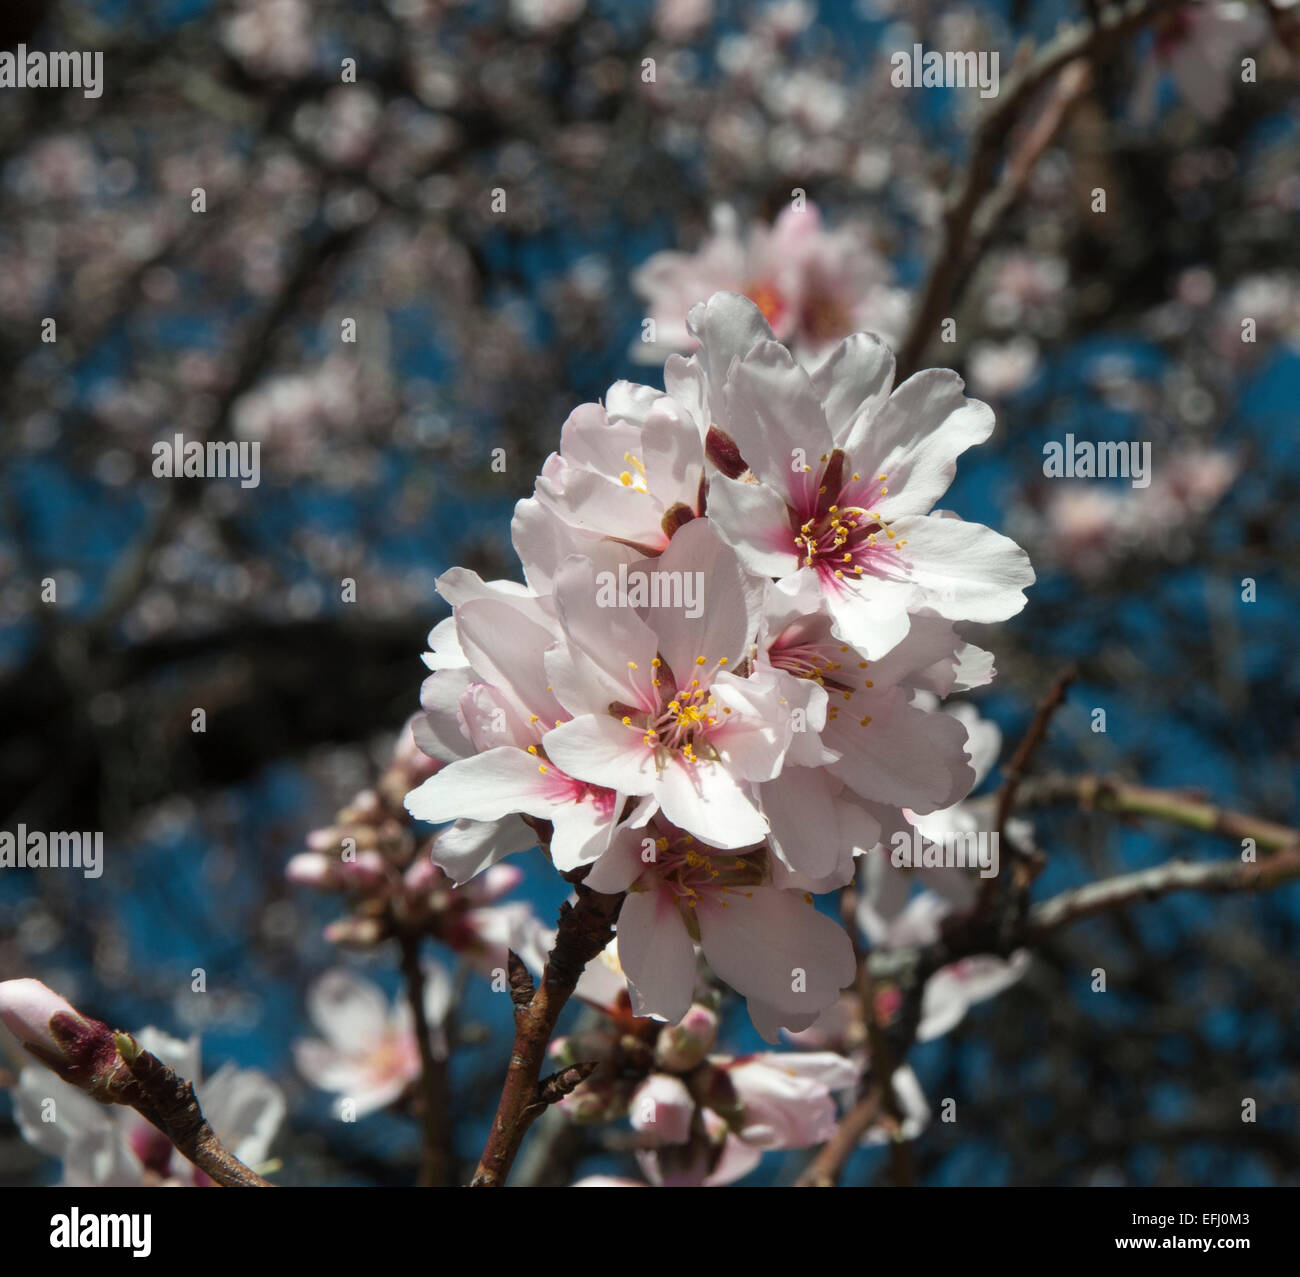 Almond is native to the Middle East but cultivated in many other regions. On La Palma it is flowering in February. Stock Photo